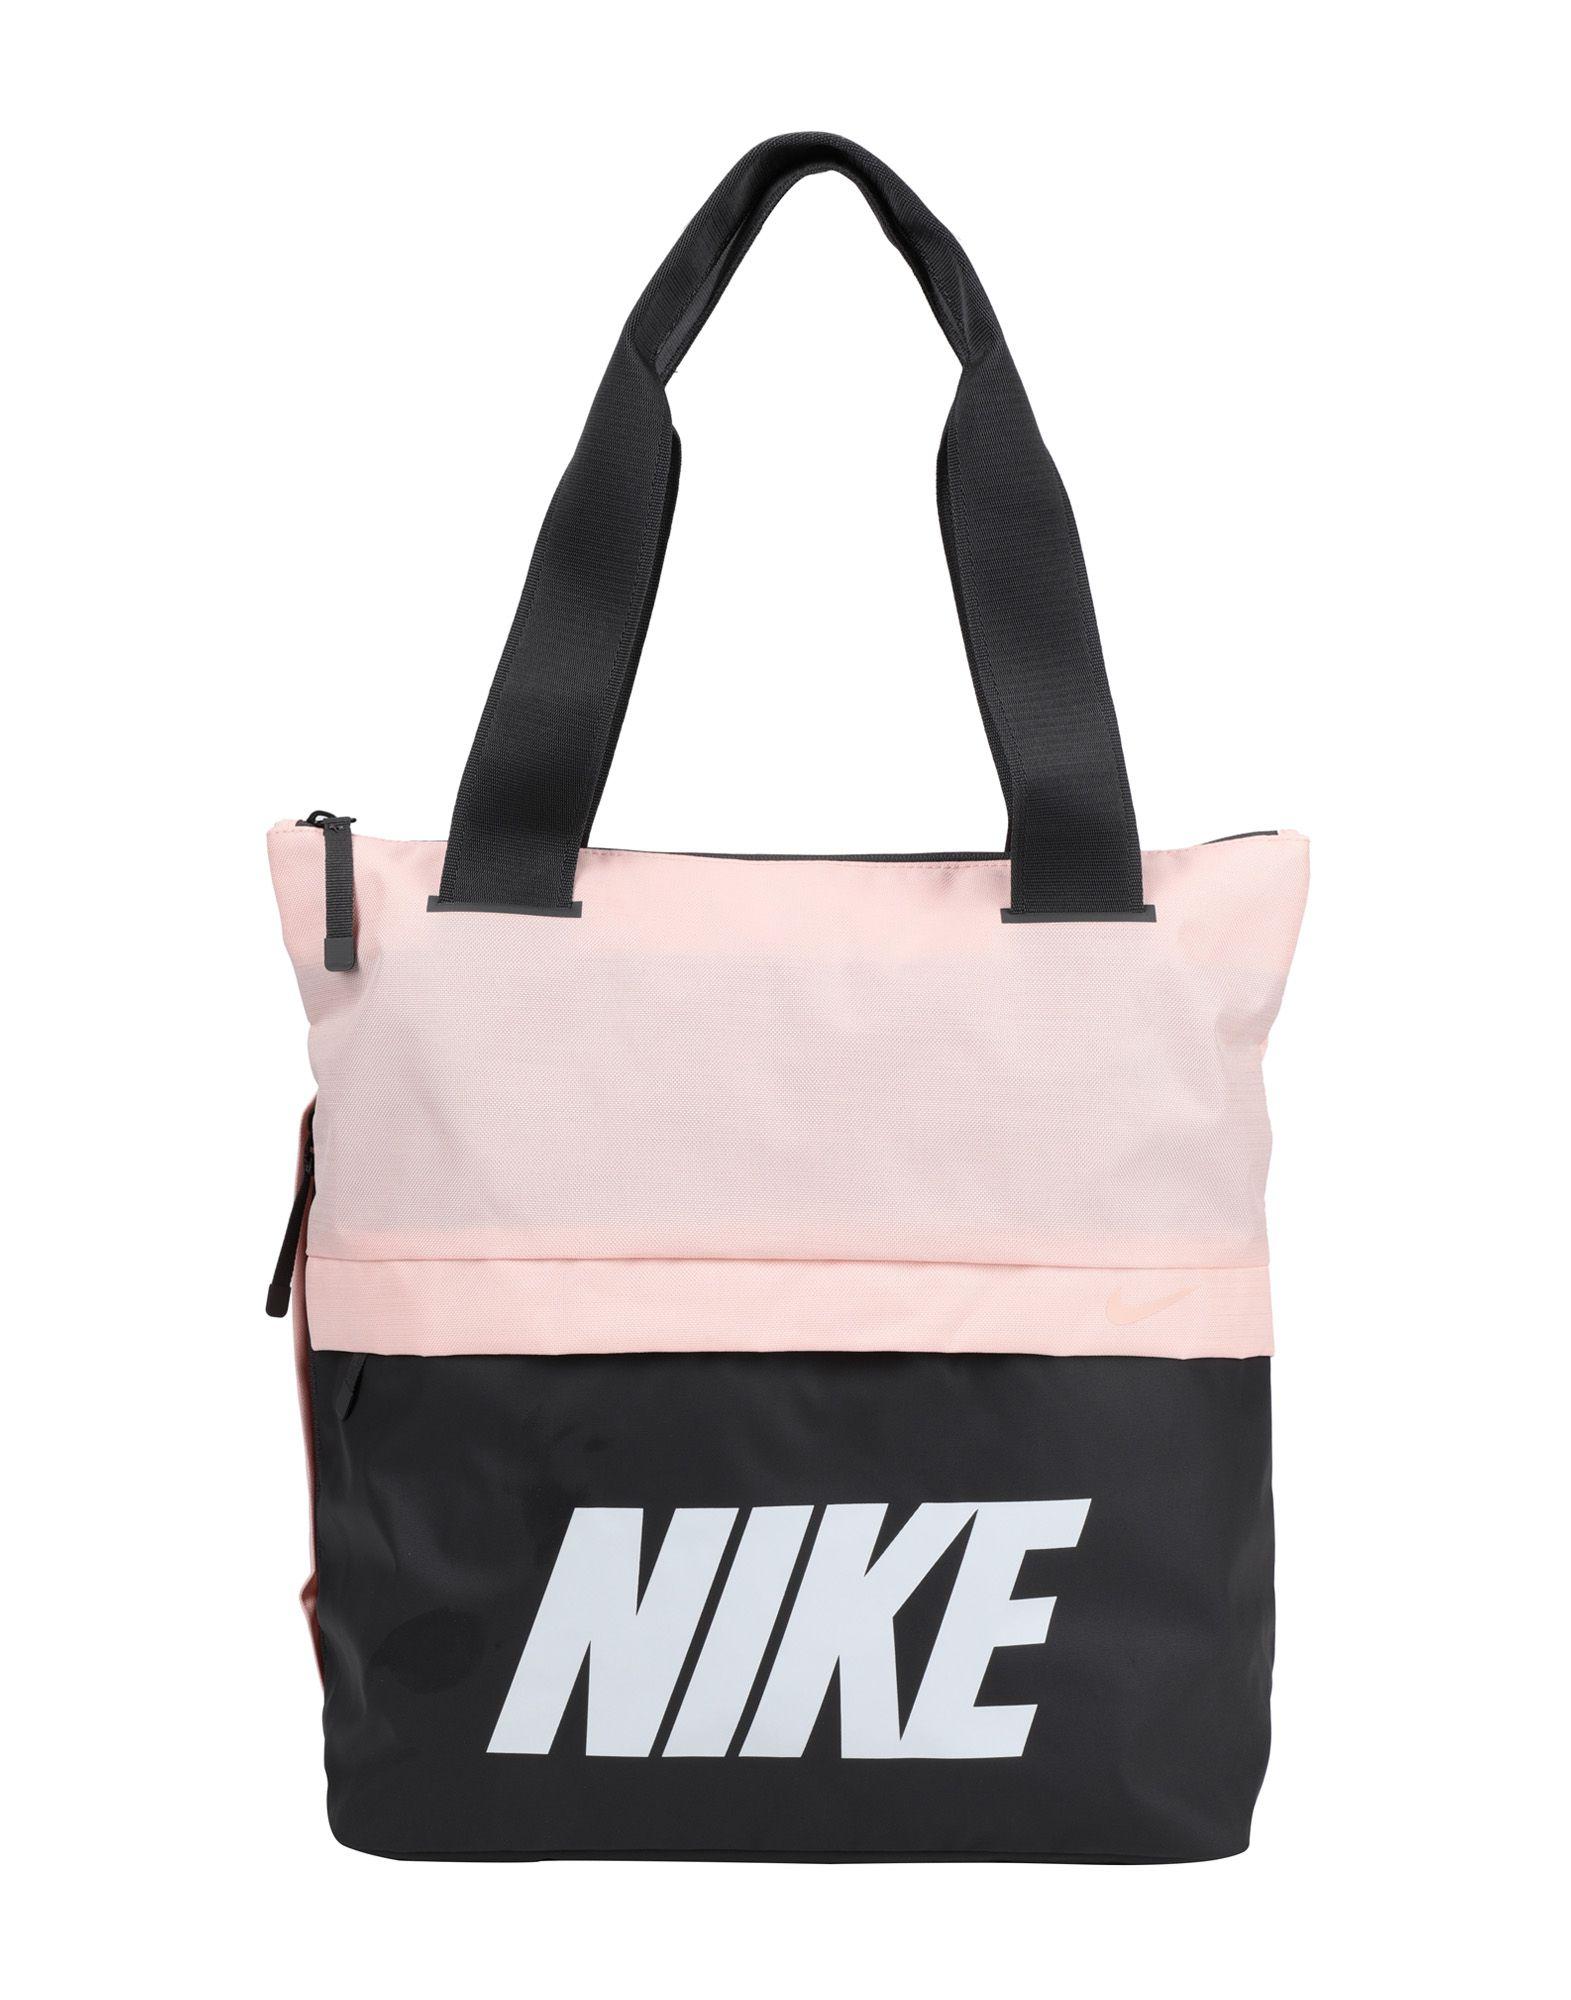 nike sac a main Cheaper Than Retail Price> Buy Clothing, Accessories and  lifestyle products for women & men -